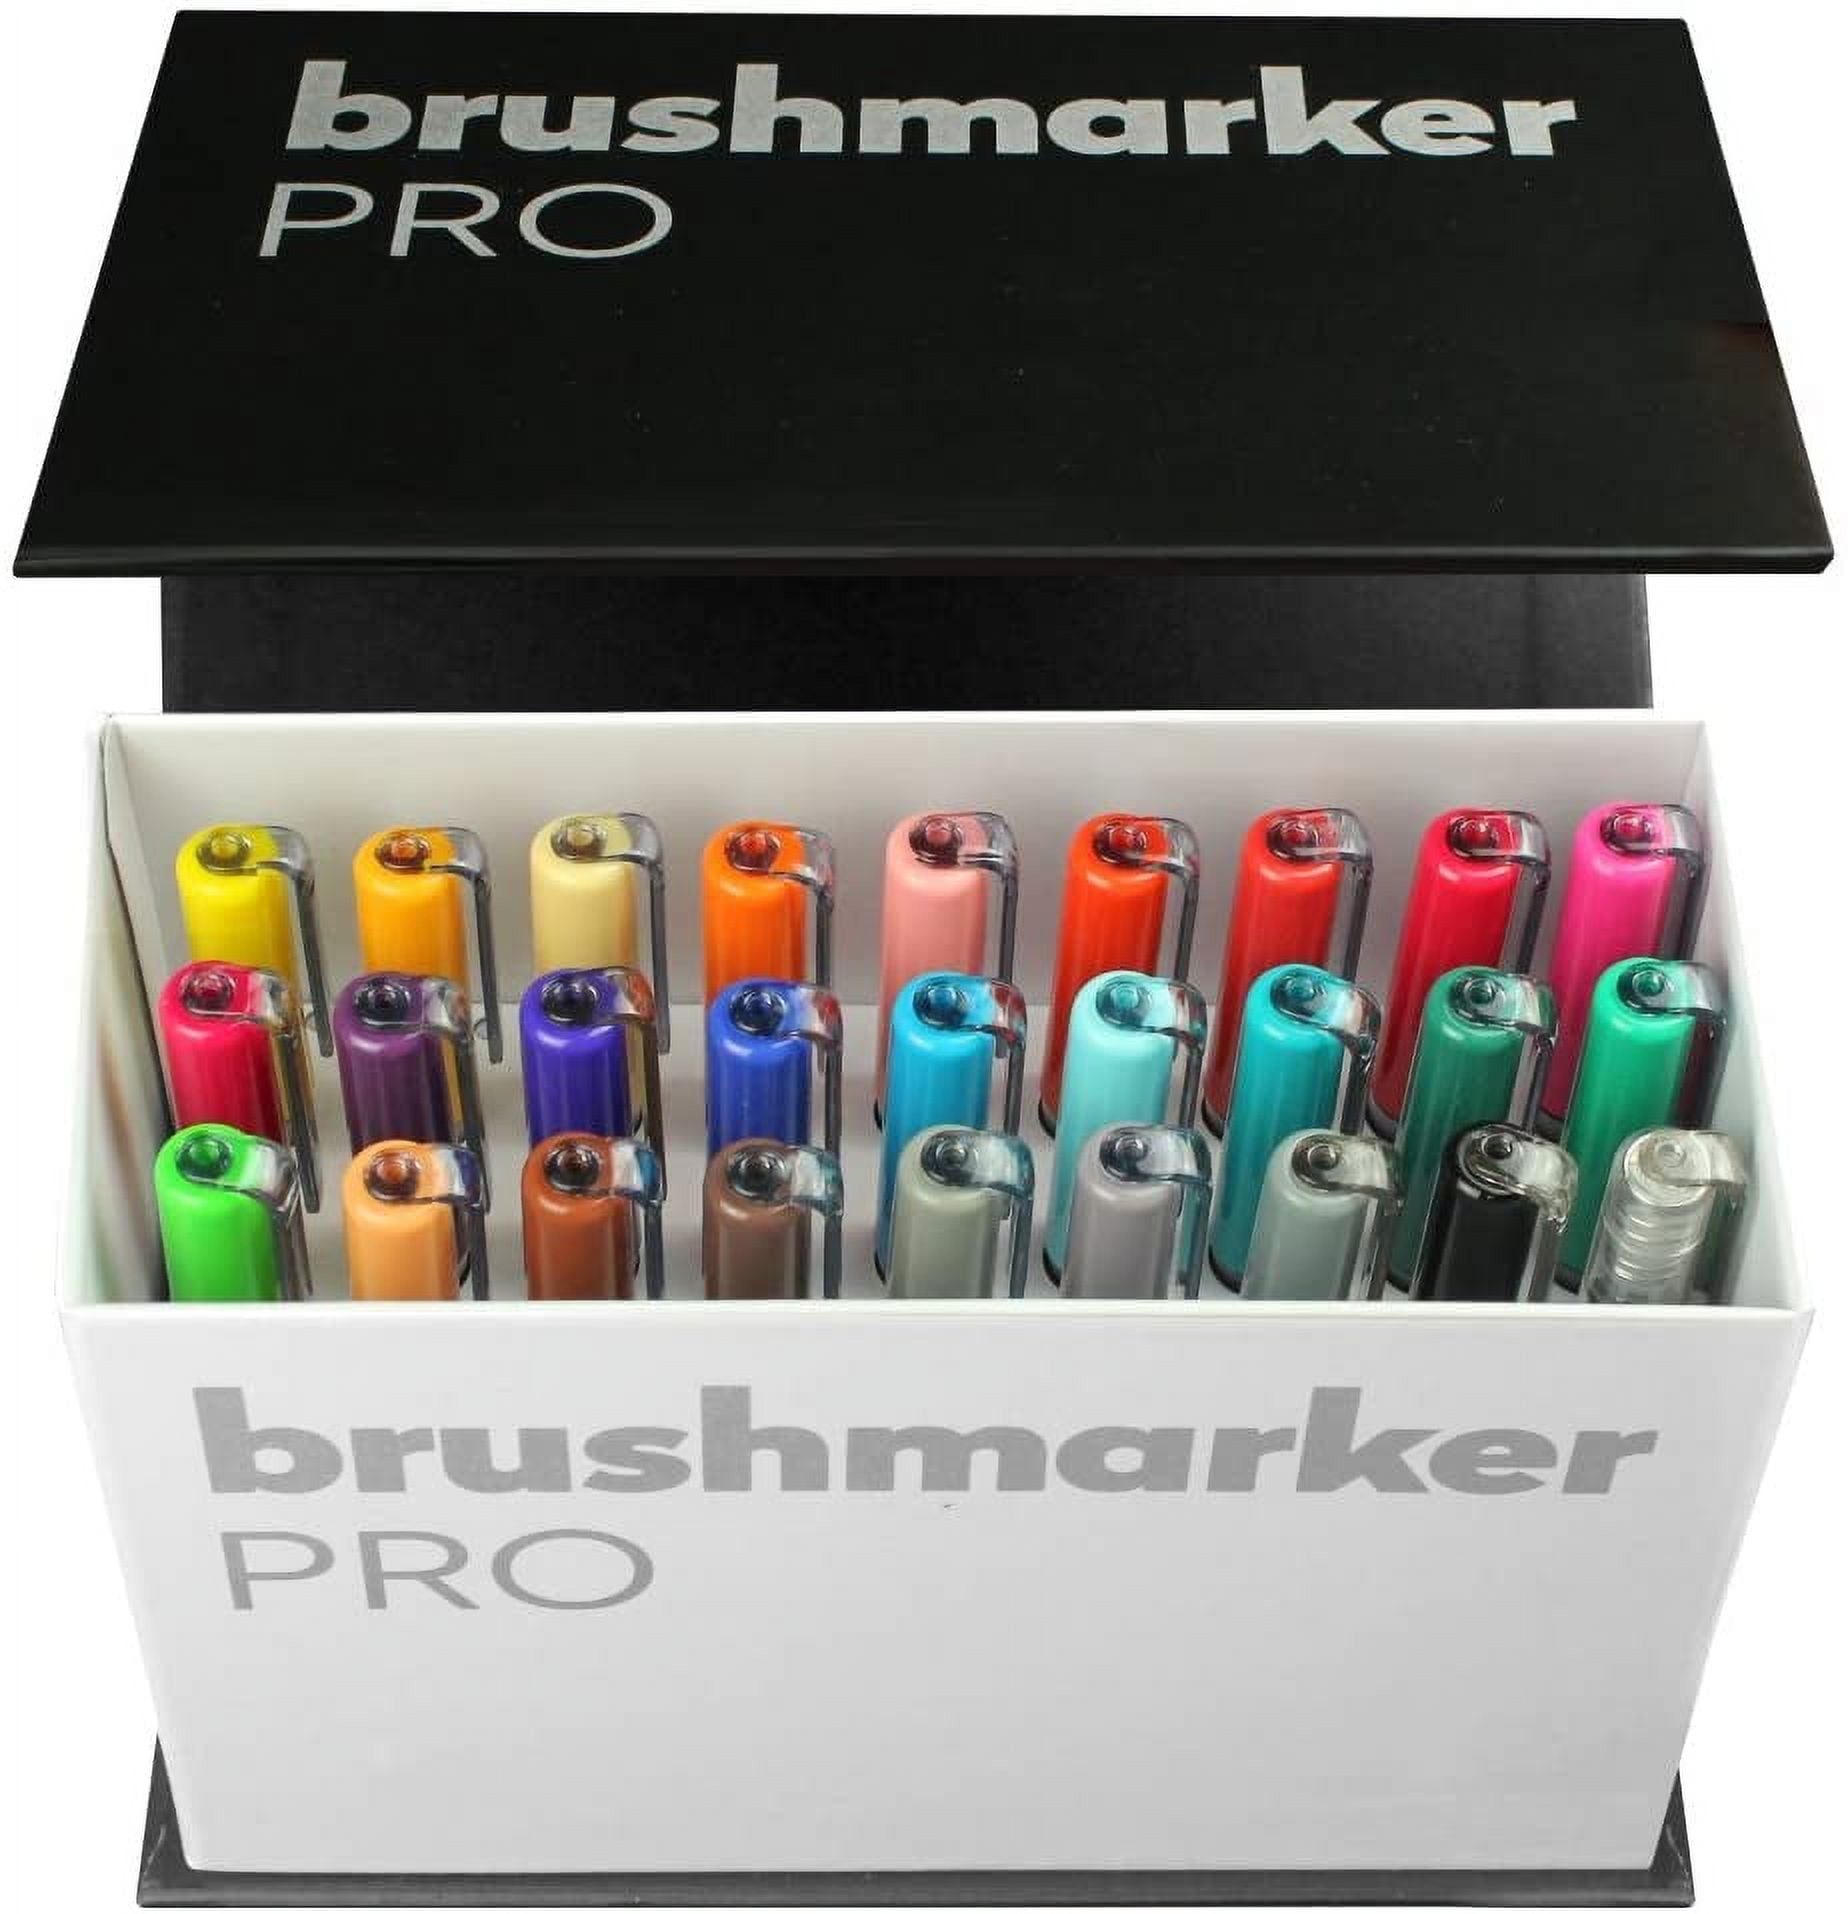  KARIN Megabox Brush Marker Pro Water-Based Brush Pen Suitable  for Painting, Drawing and Handlettering Multi-Coloured KAR27C7 Assorted :  Arts, Crafts & Sewing